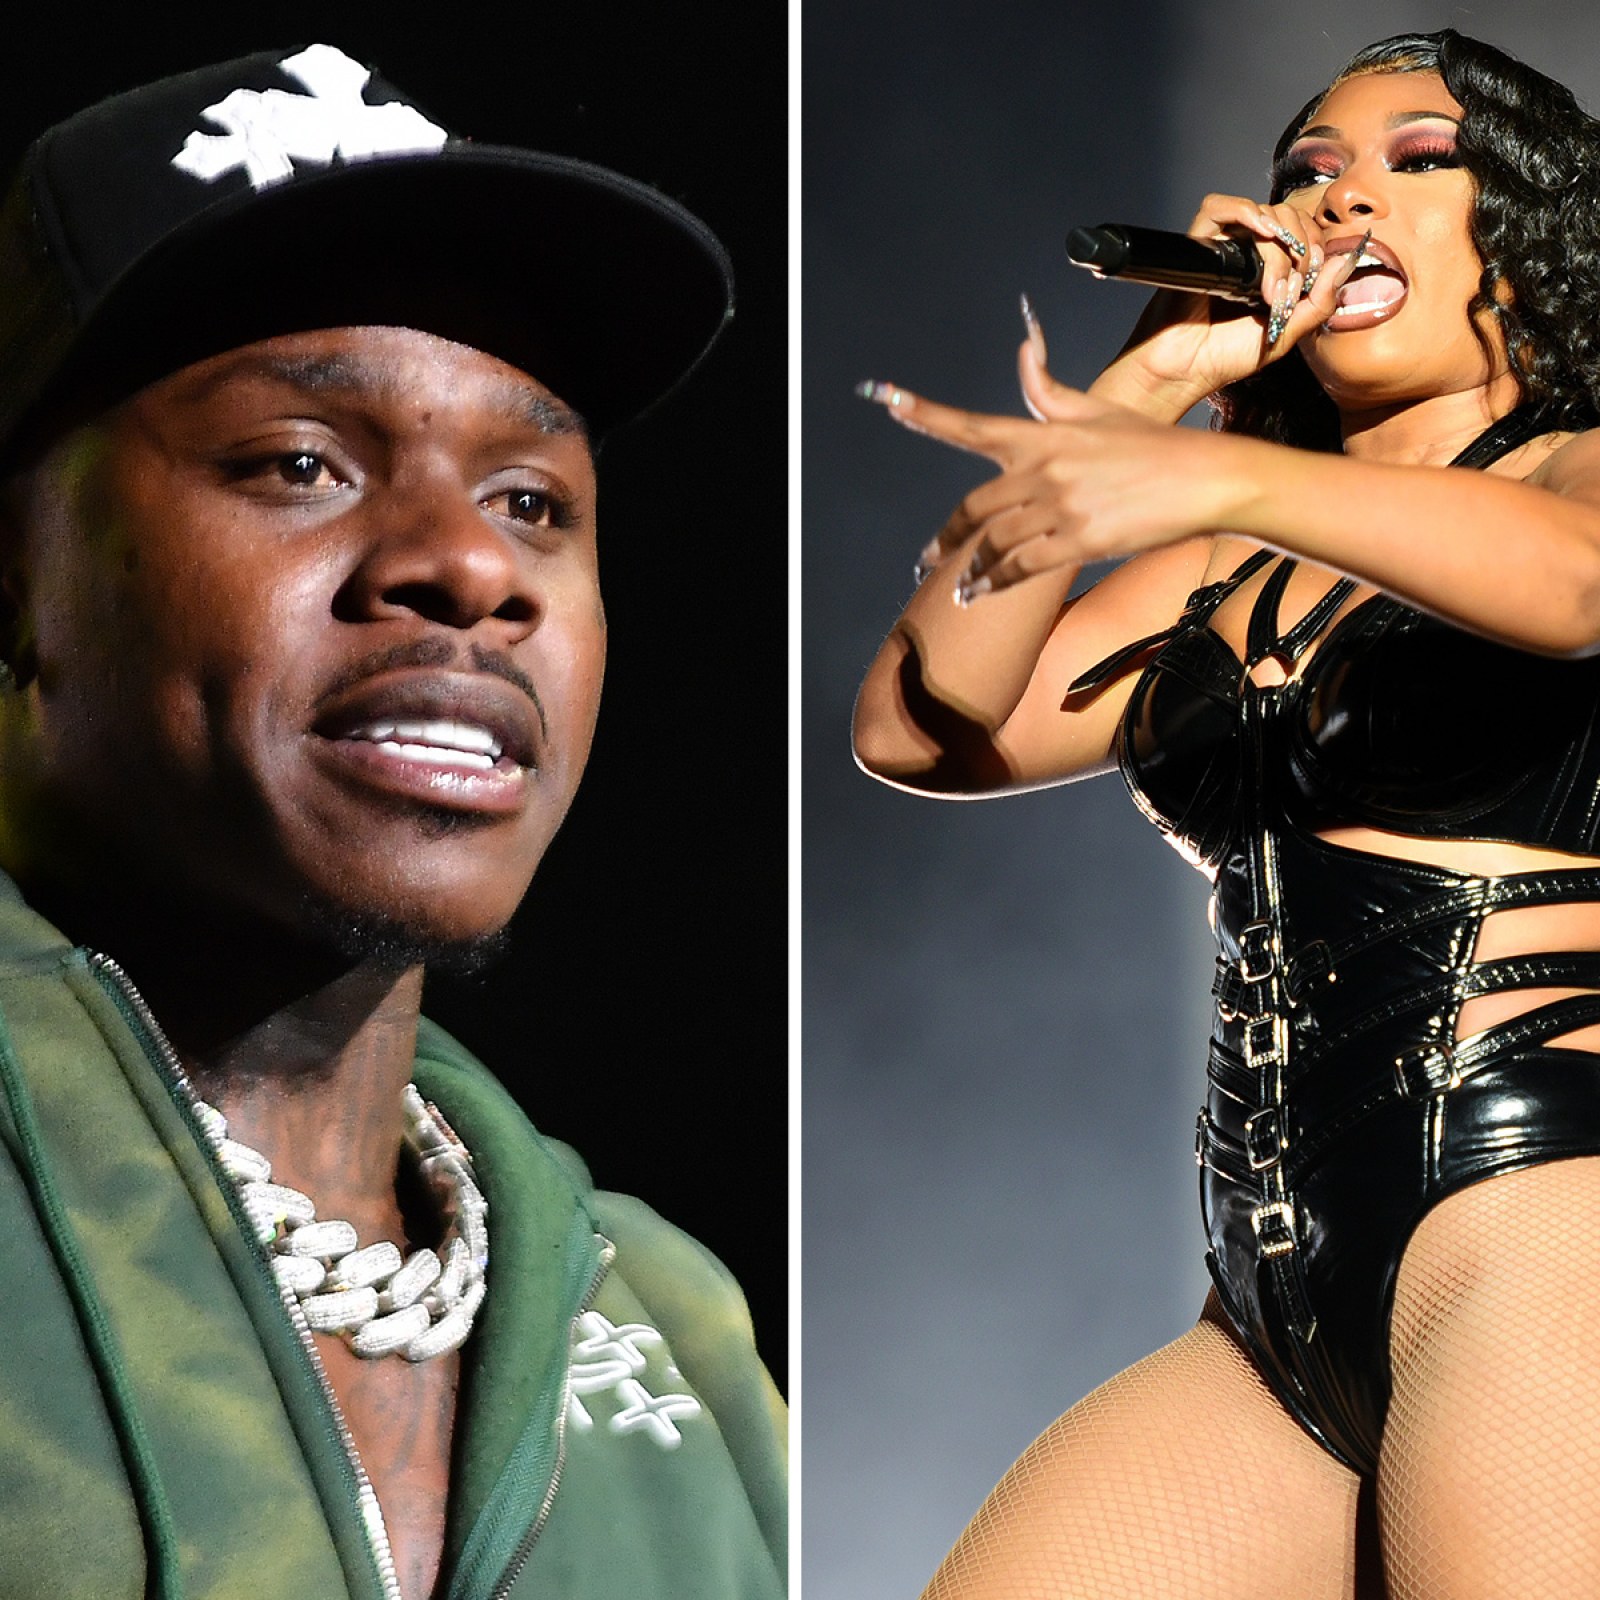 DaBaby Claims He Slept With Megan Thee Stallion in New Song 'Boogeyman'